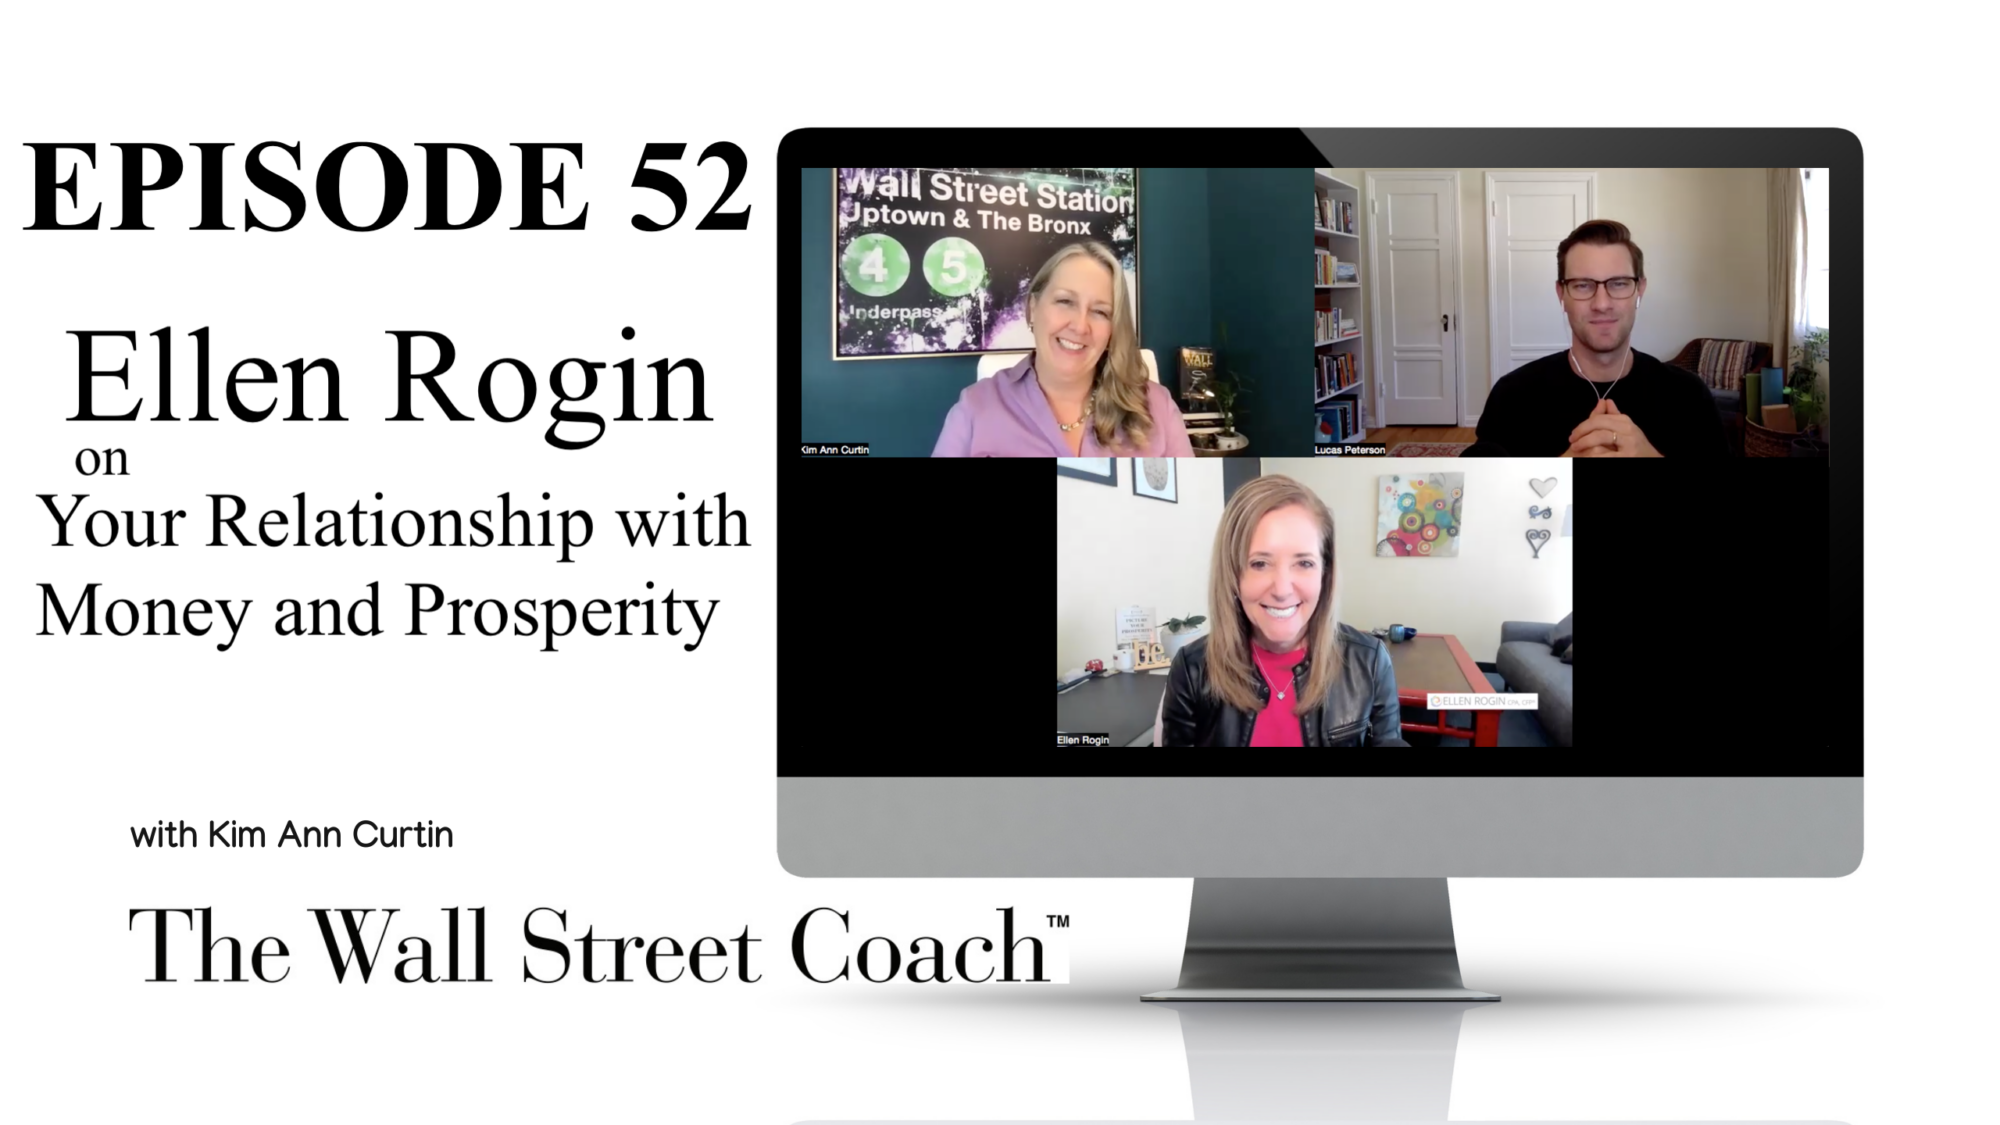 Episode 52: Ellen Rogin on Your Relationship with Money and Prosperity